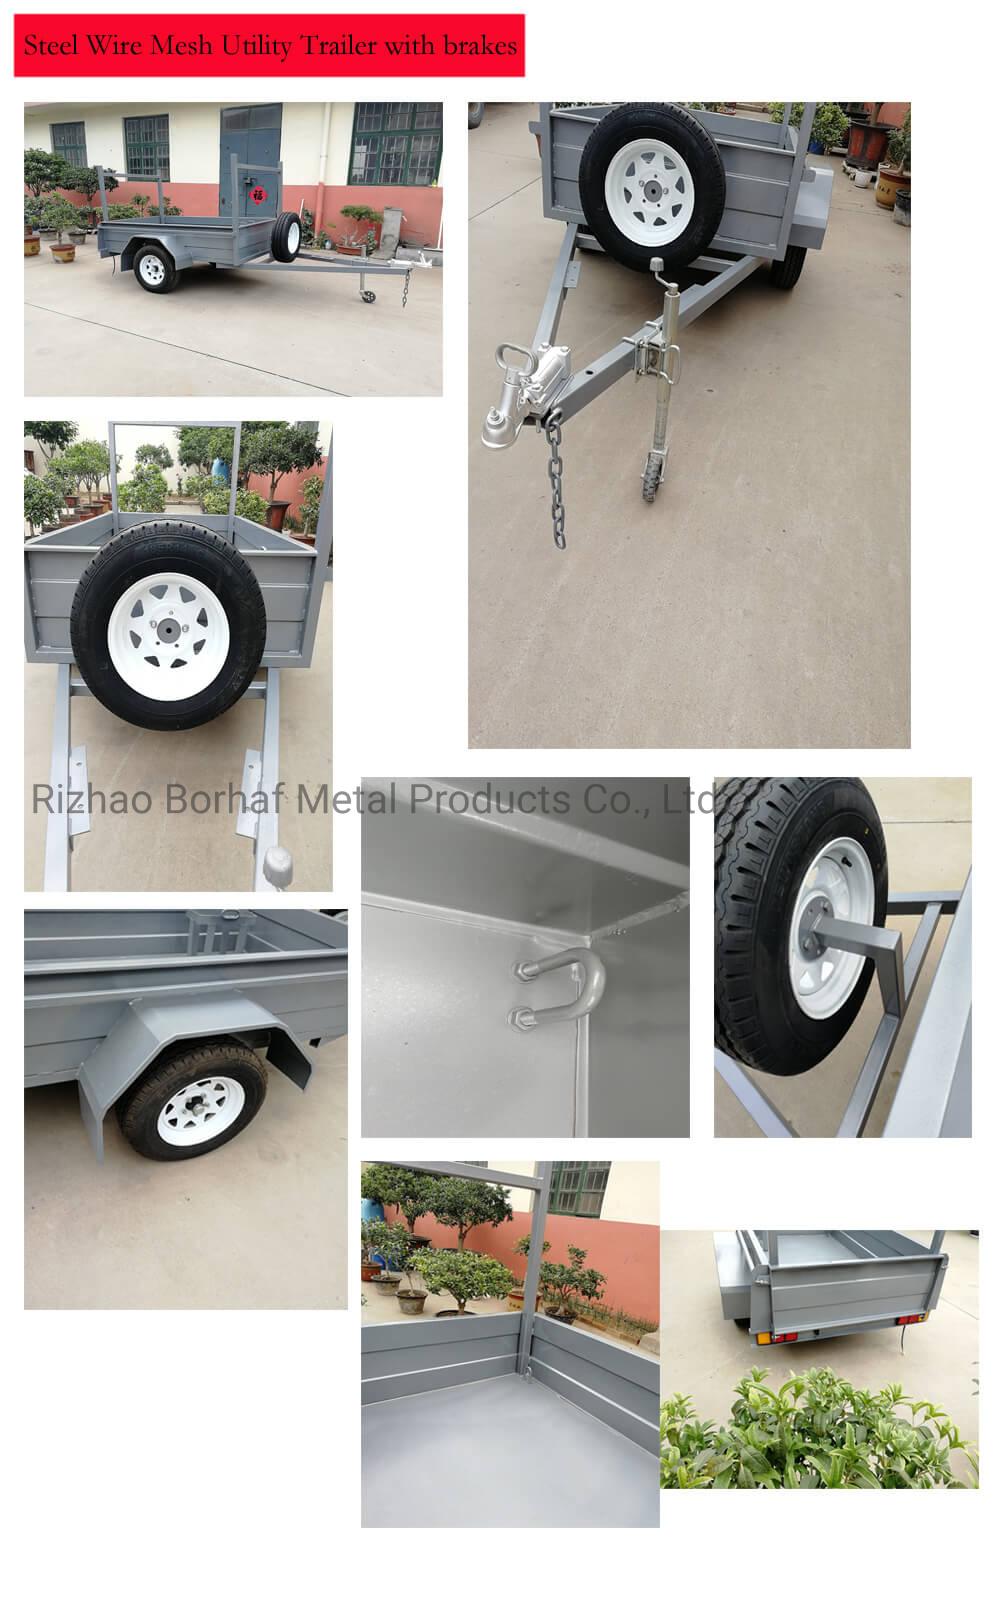 Steel Utility Cage Trailer Single Axle Trailer with Brakes for Transport